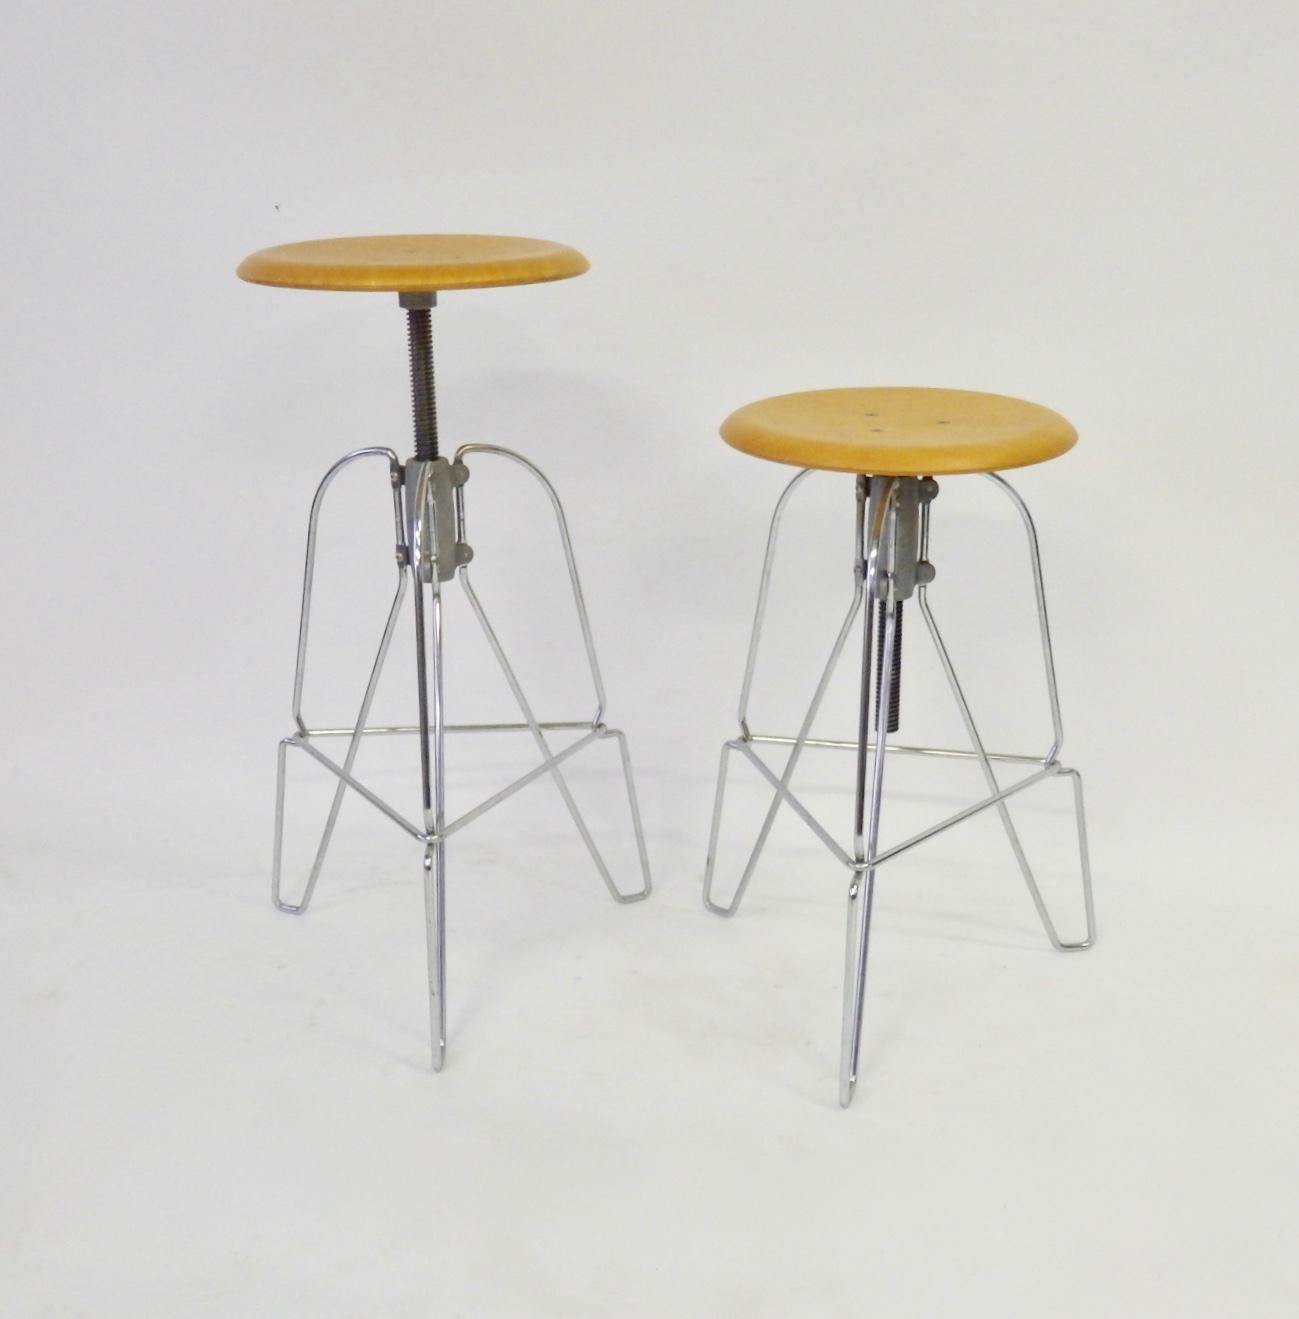 American Pair of Industrial Chic Steel and Wood Adjustable Bar Stools